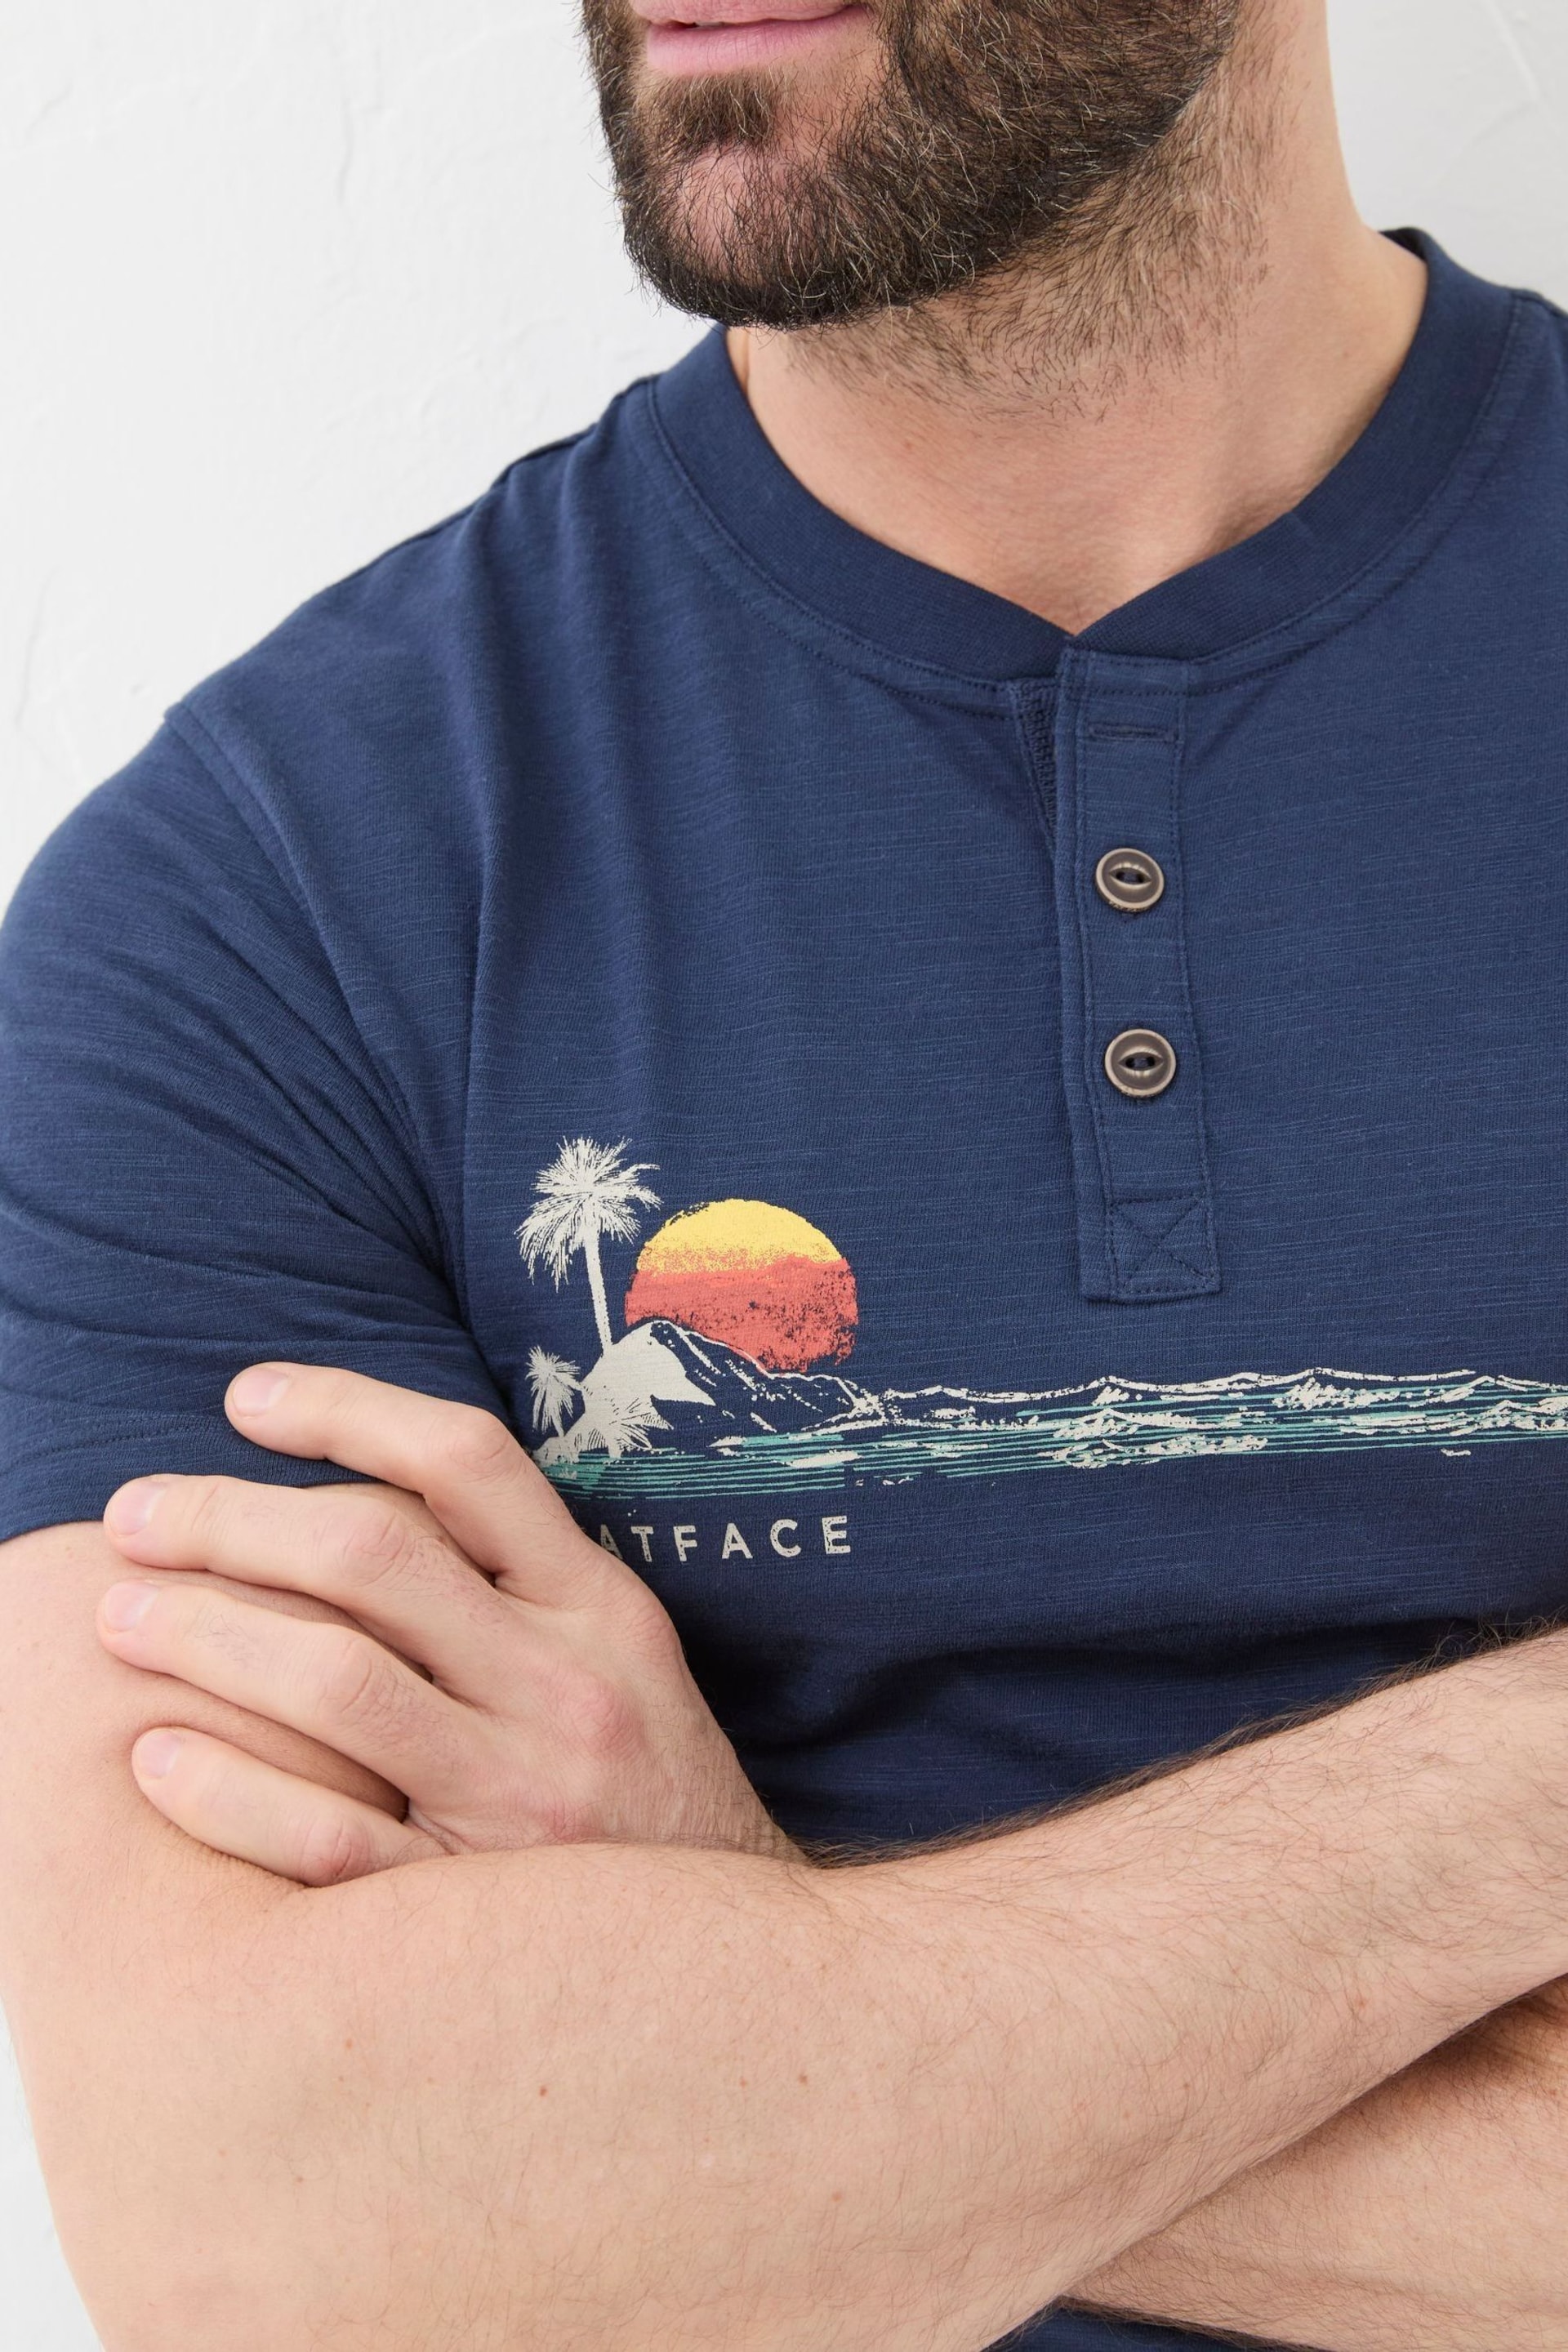 FatFace Blue Chest Stripe Oasis Henley T-Shirt - Image 2 of 4